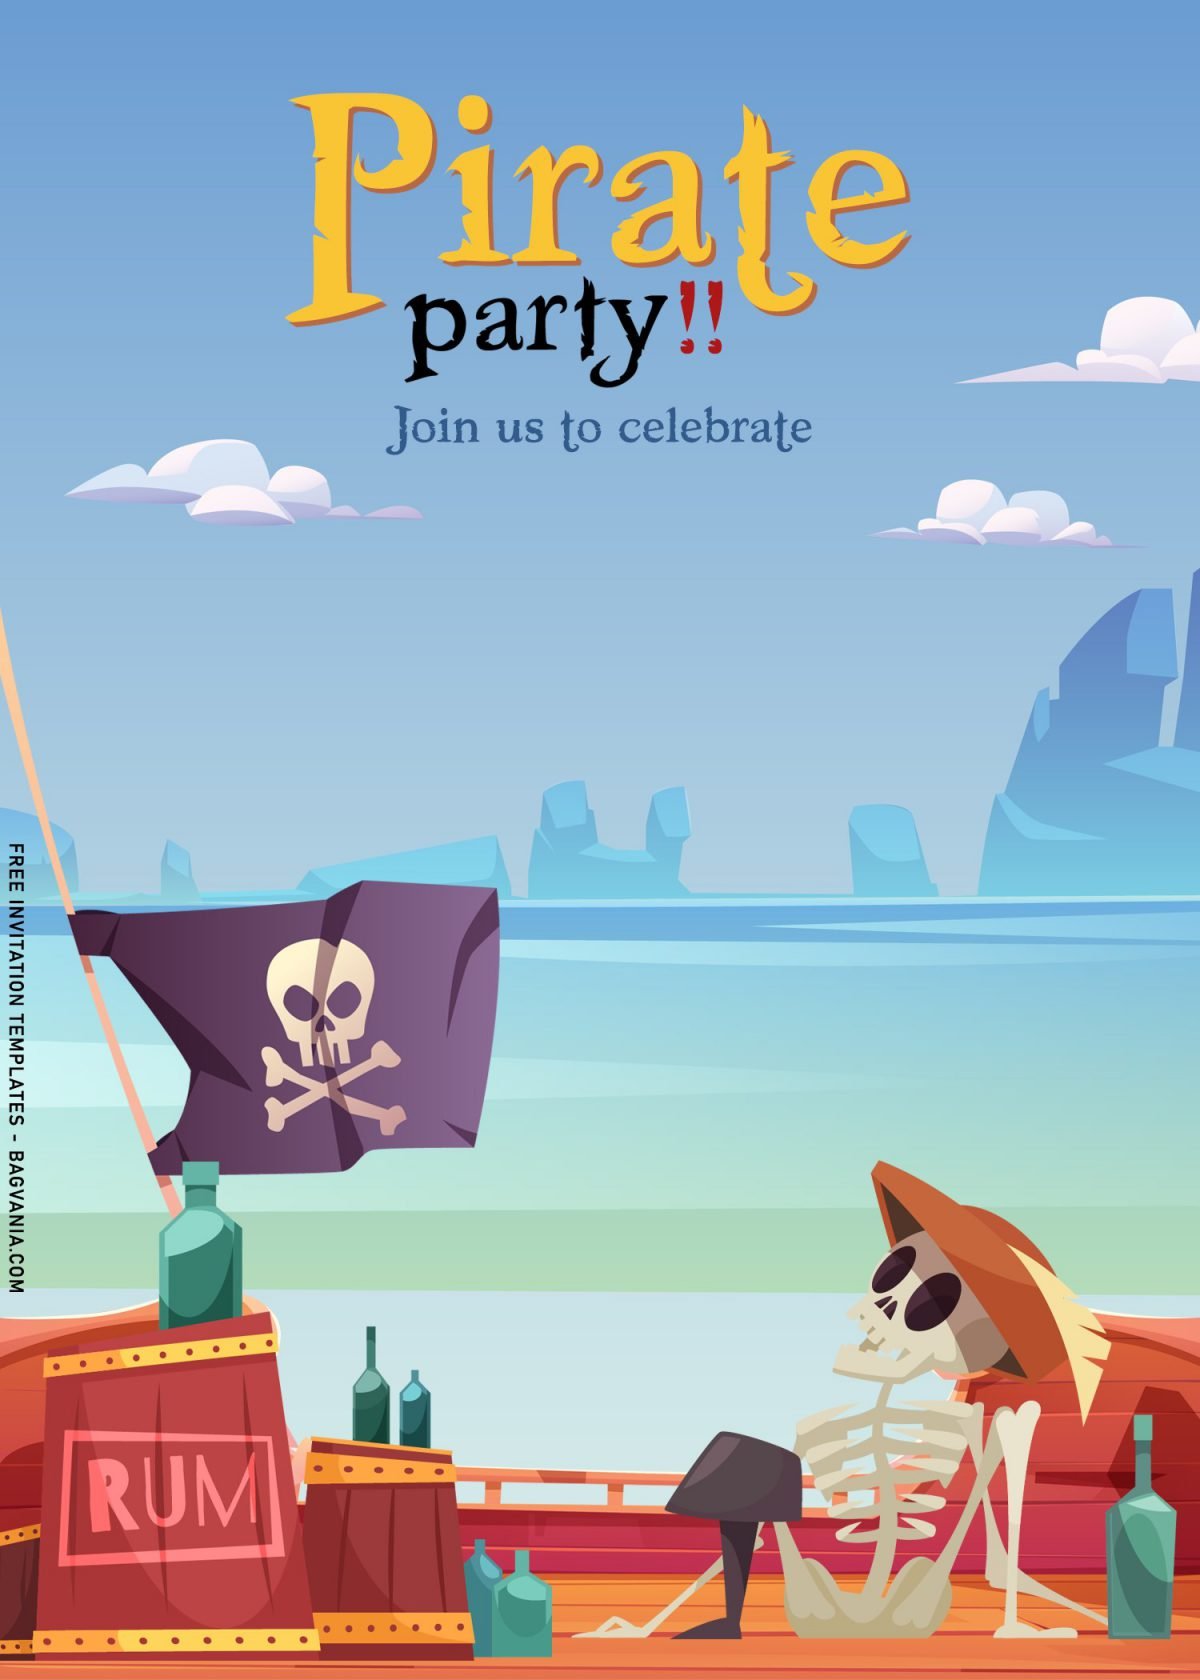 7+ Personalized Pirate Birthday Invitation Templates For Any Ages and has Jolly Roger Pirate Flag